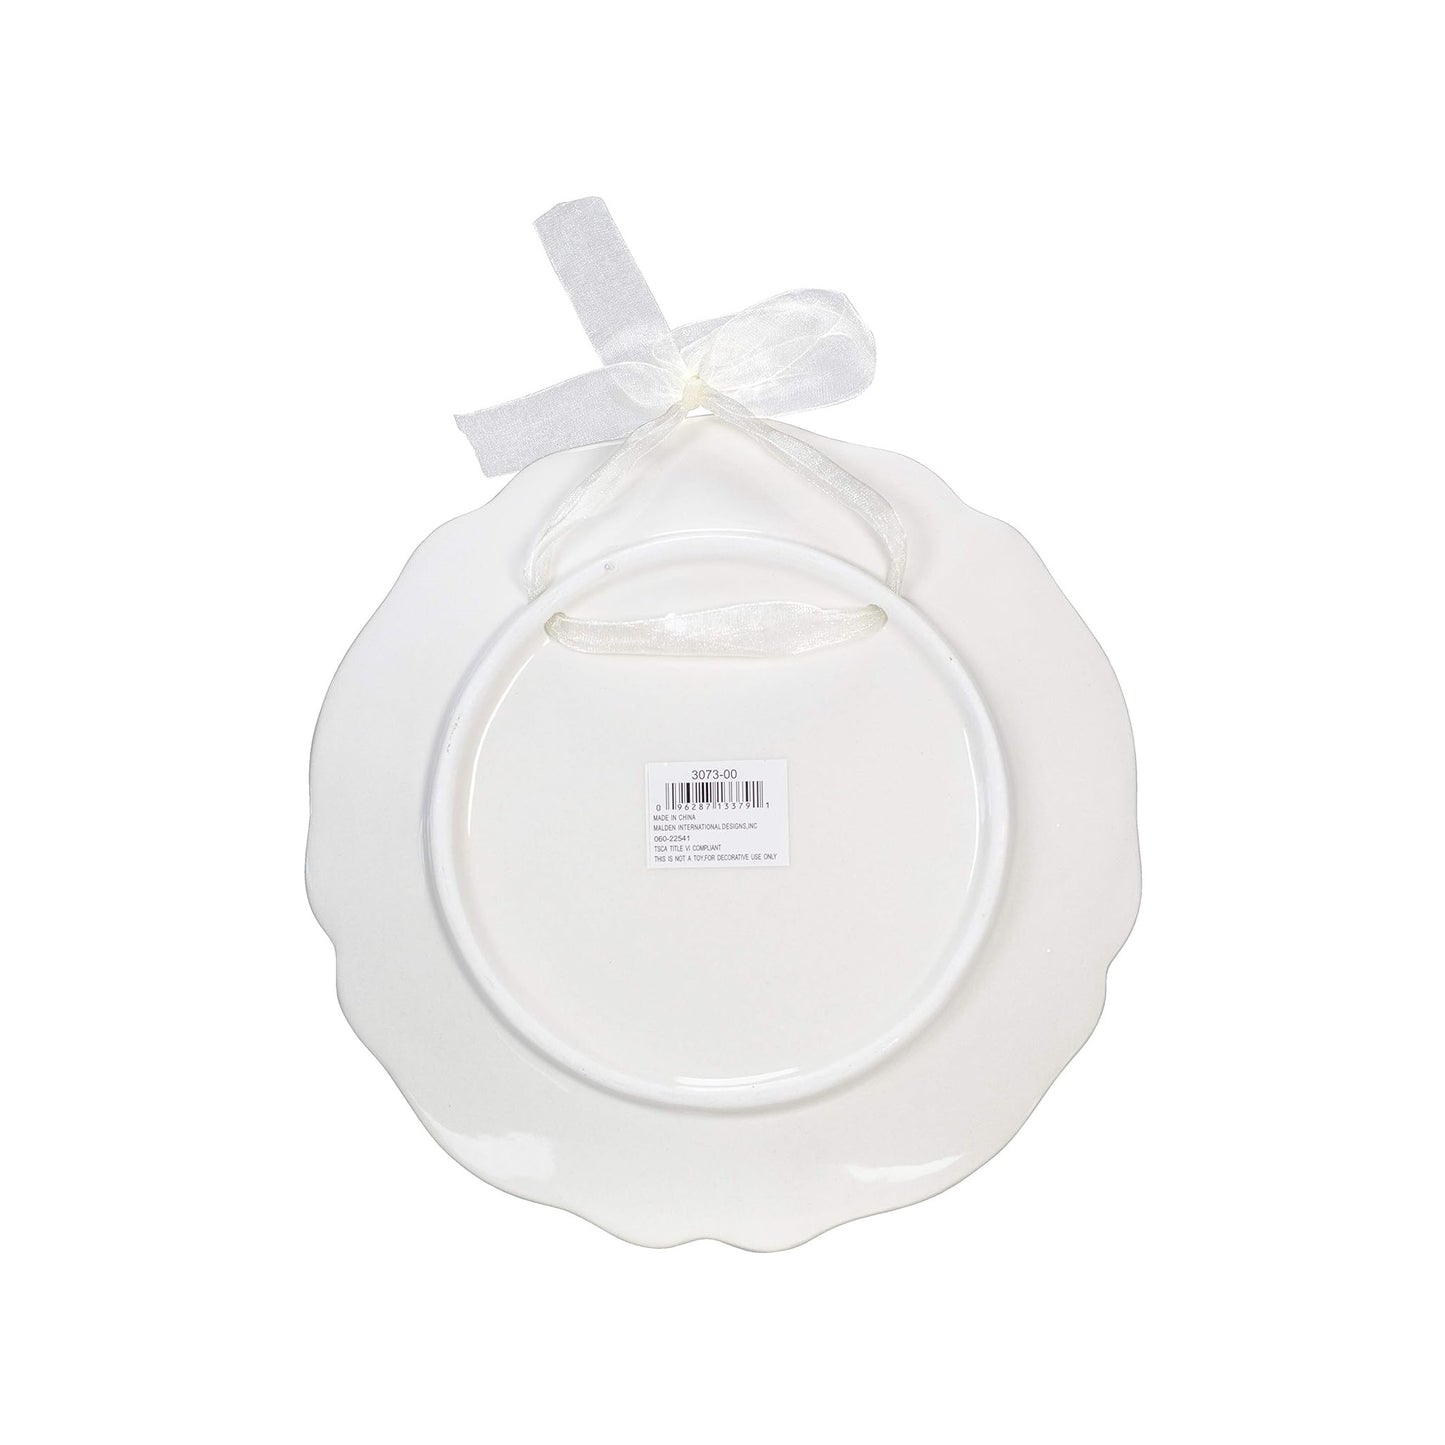 Malden 50th Anniversary Ceramic Plate with Wall Hanging Ribbon